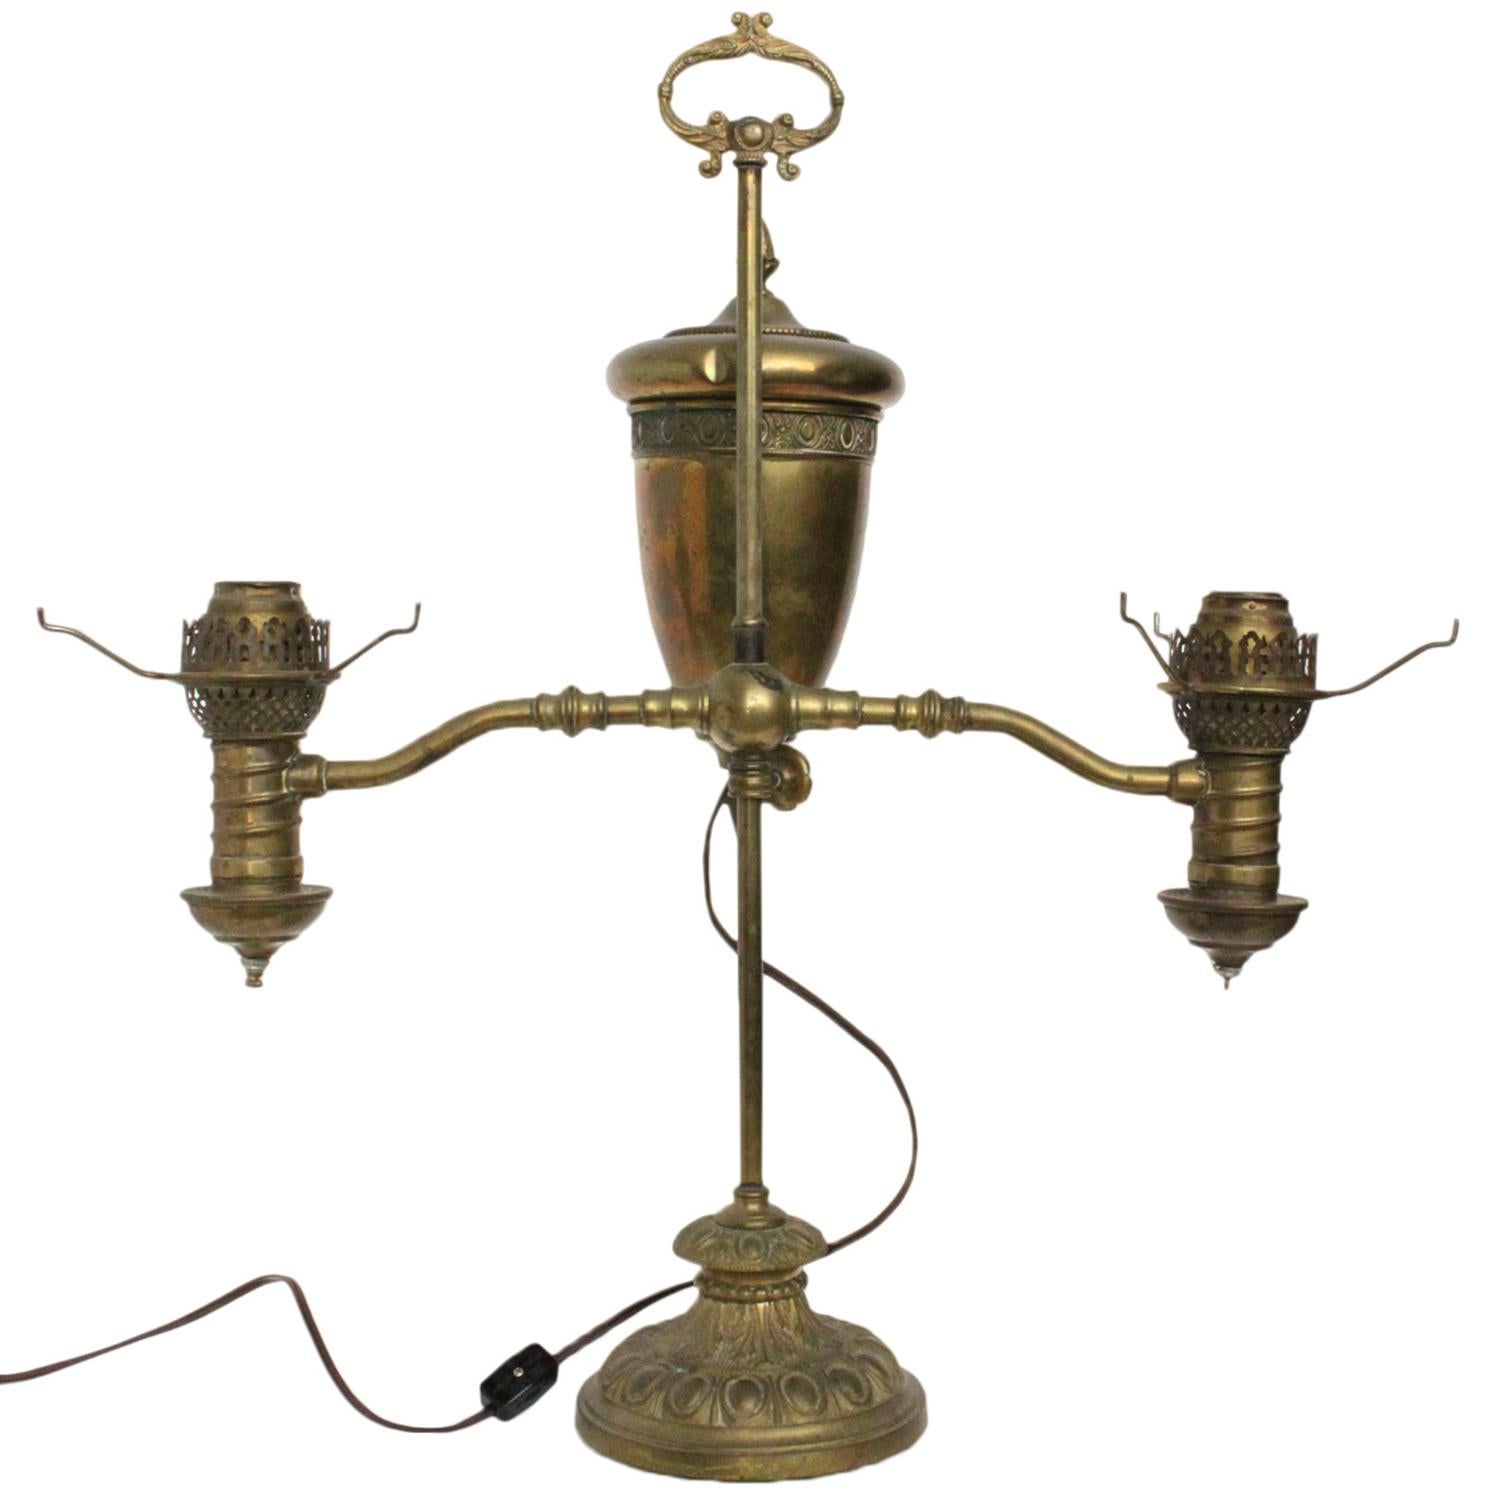 Imagine your space in the captivating glow with this brass double arm lamp with a cord length of 94 inches. This exquisite piece accommodates any standard bulb, allowing you to illuminate your surroundings with personalized brilliance. Please be